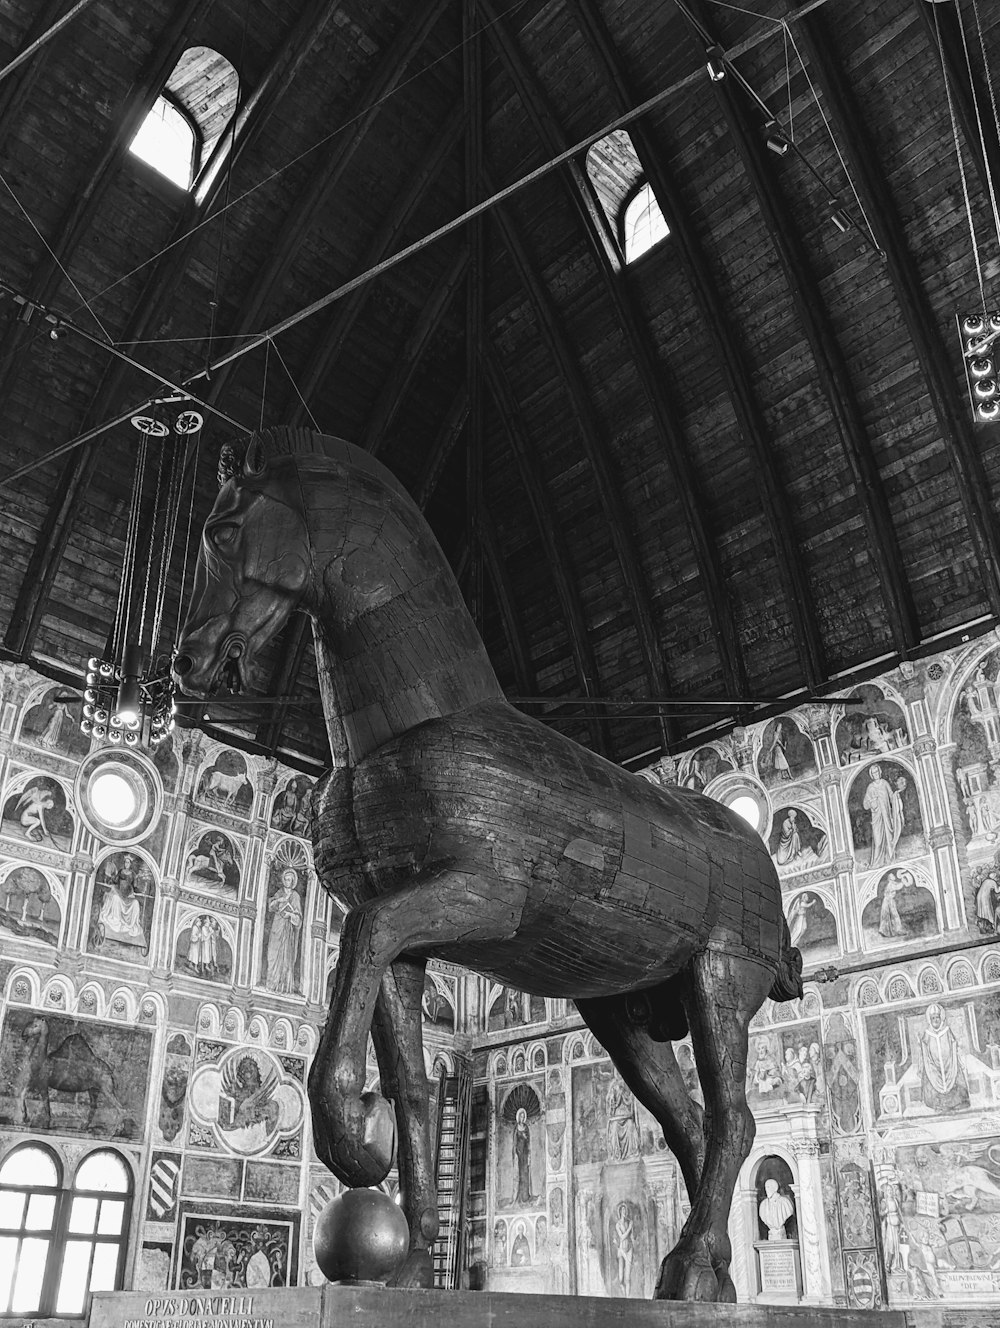 a large wooden horse statue in a building